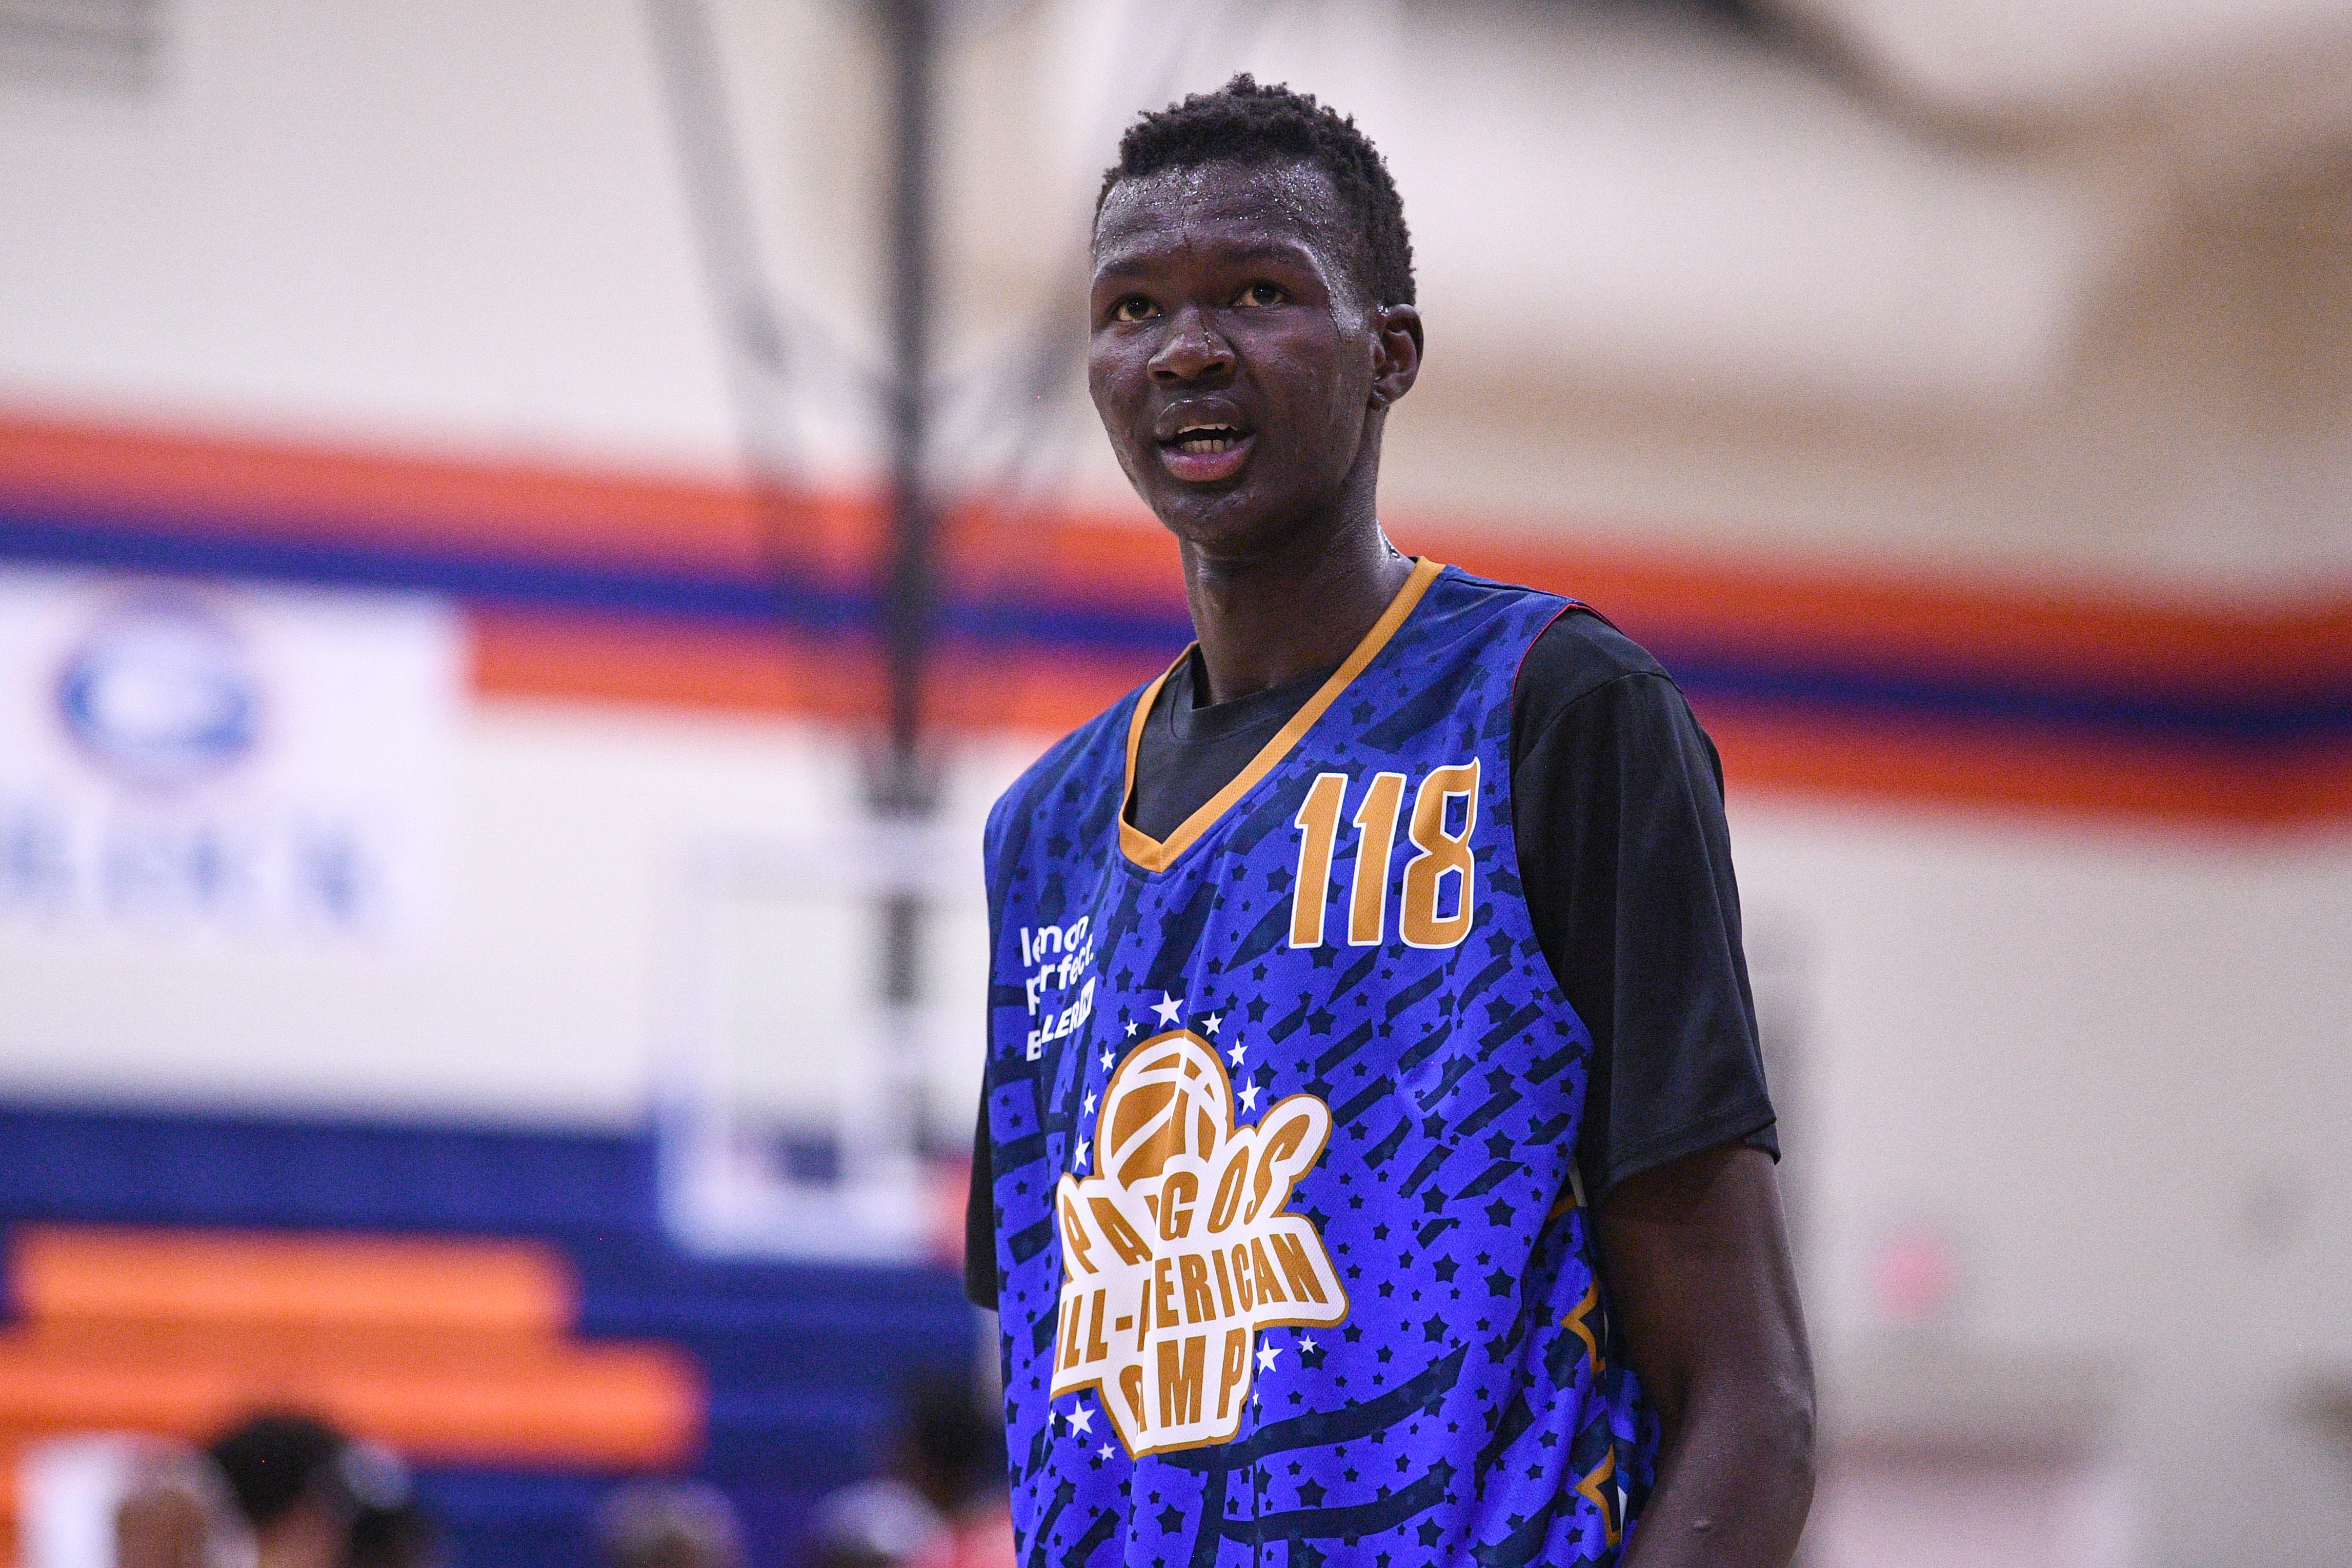 Khaman Maker looks on during the Pangos All-American Camp on June 6, 2022 at the Bishop Gorman High School in Las Vegas, NV.